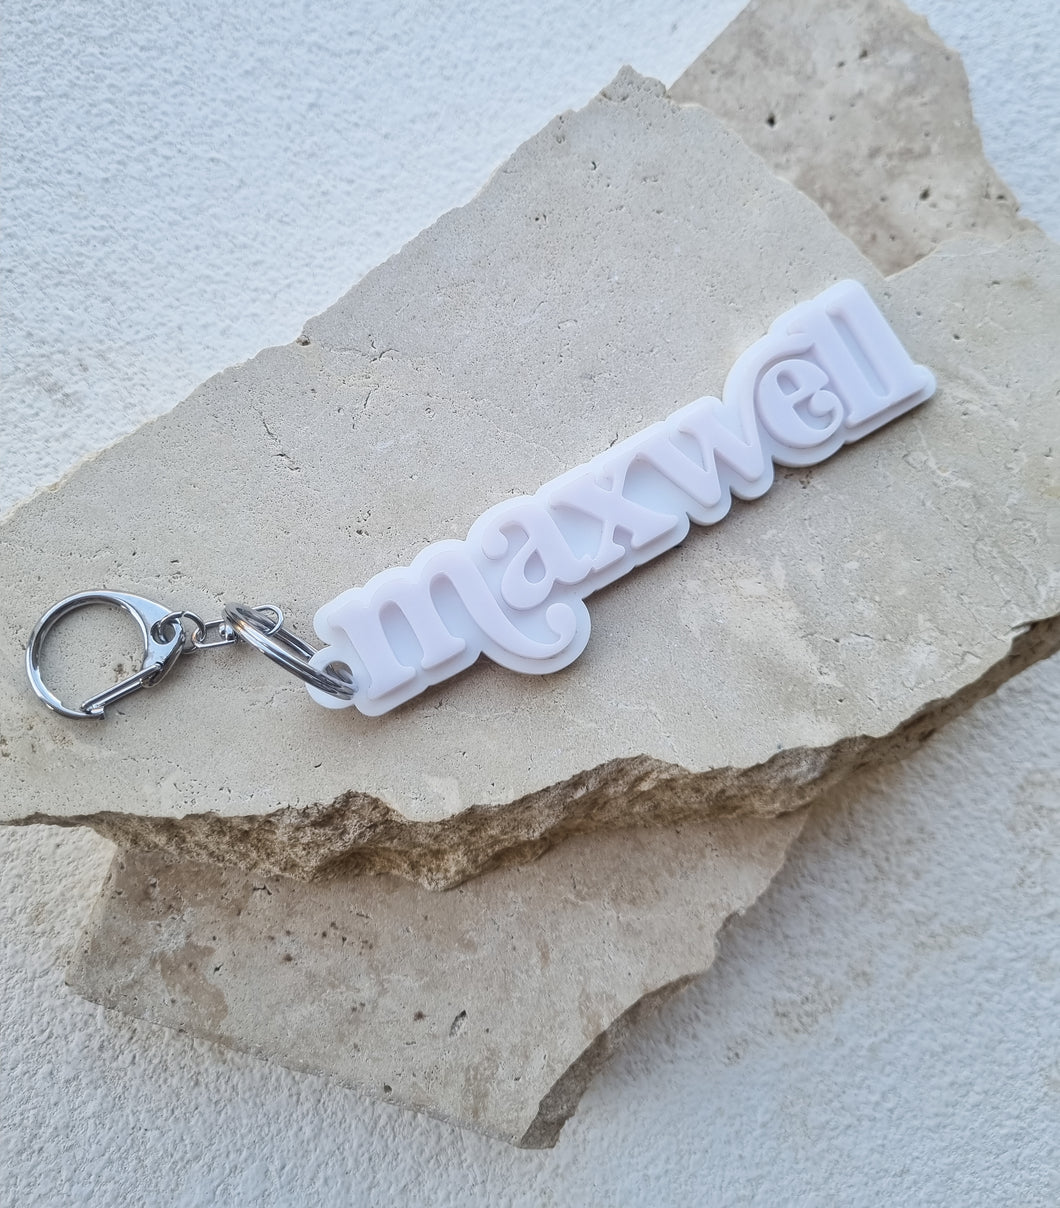 ACRYLIC PERSONALISED KEY TAG - DOUBLE LAYER